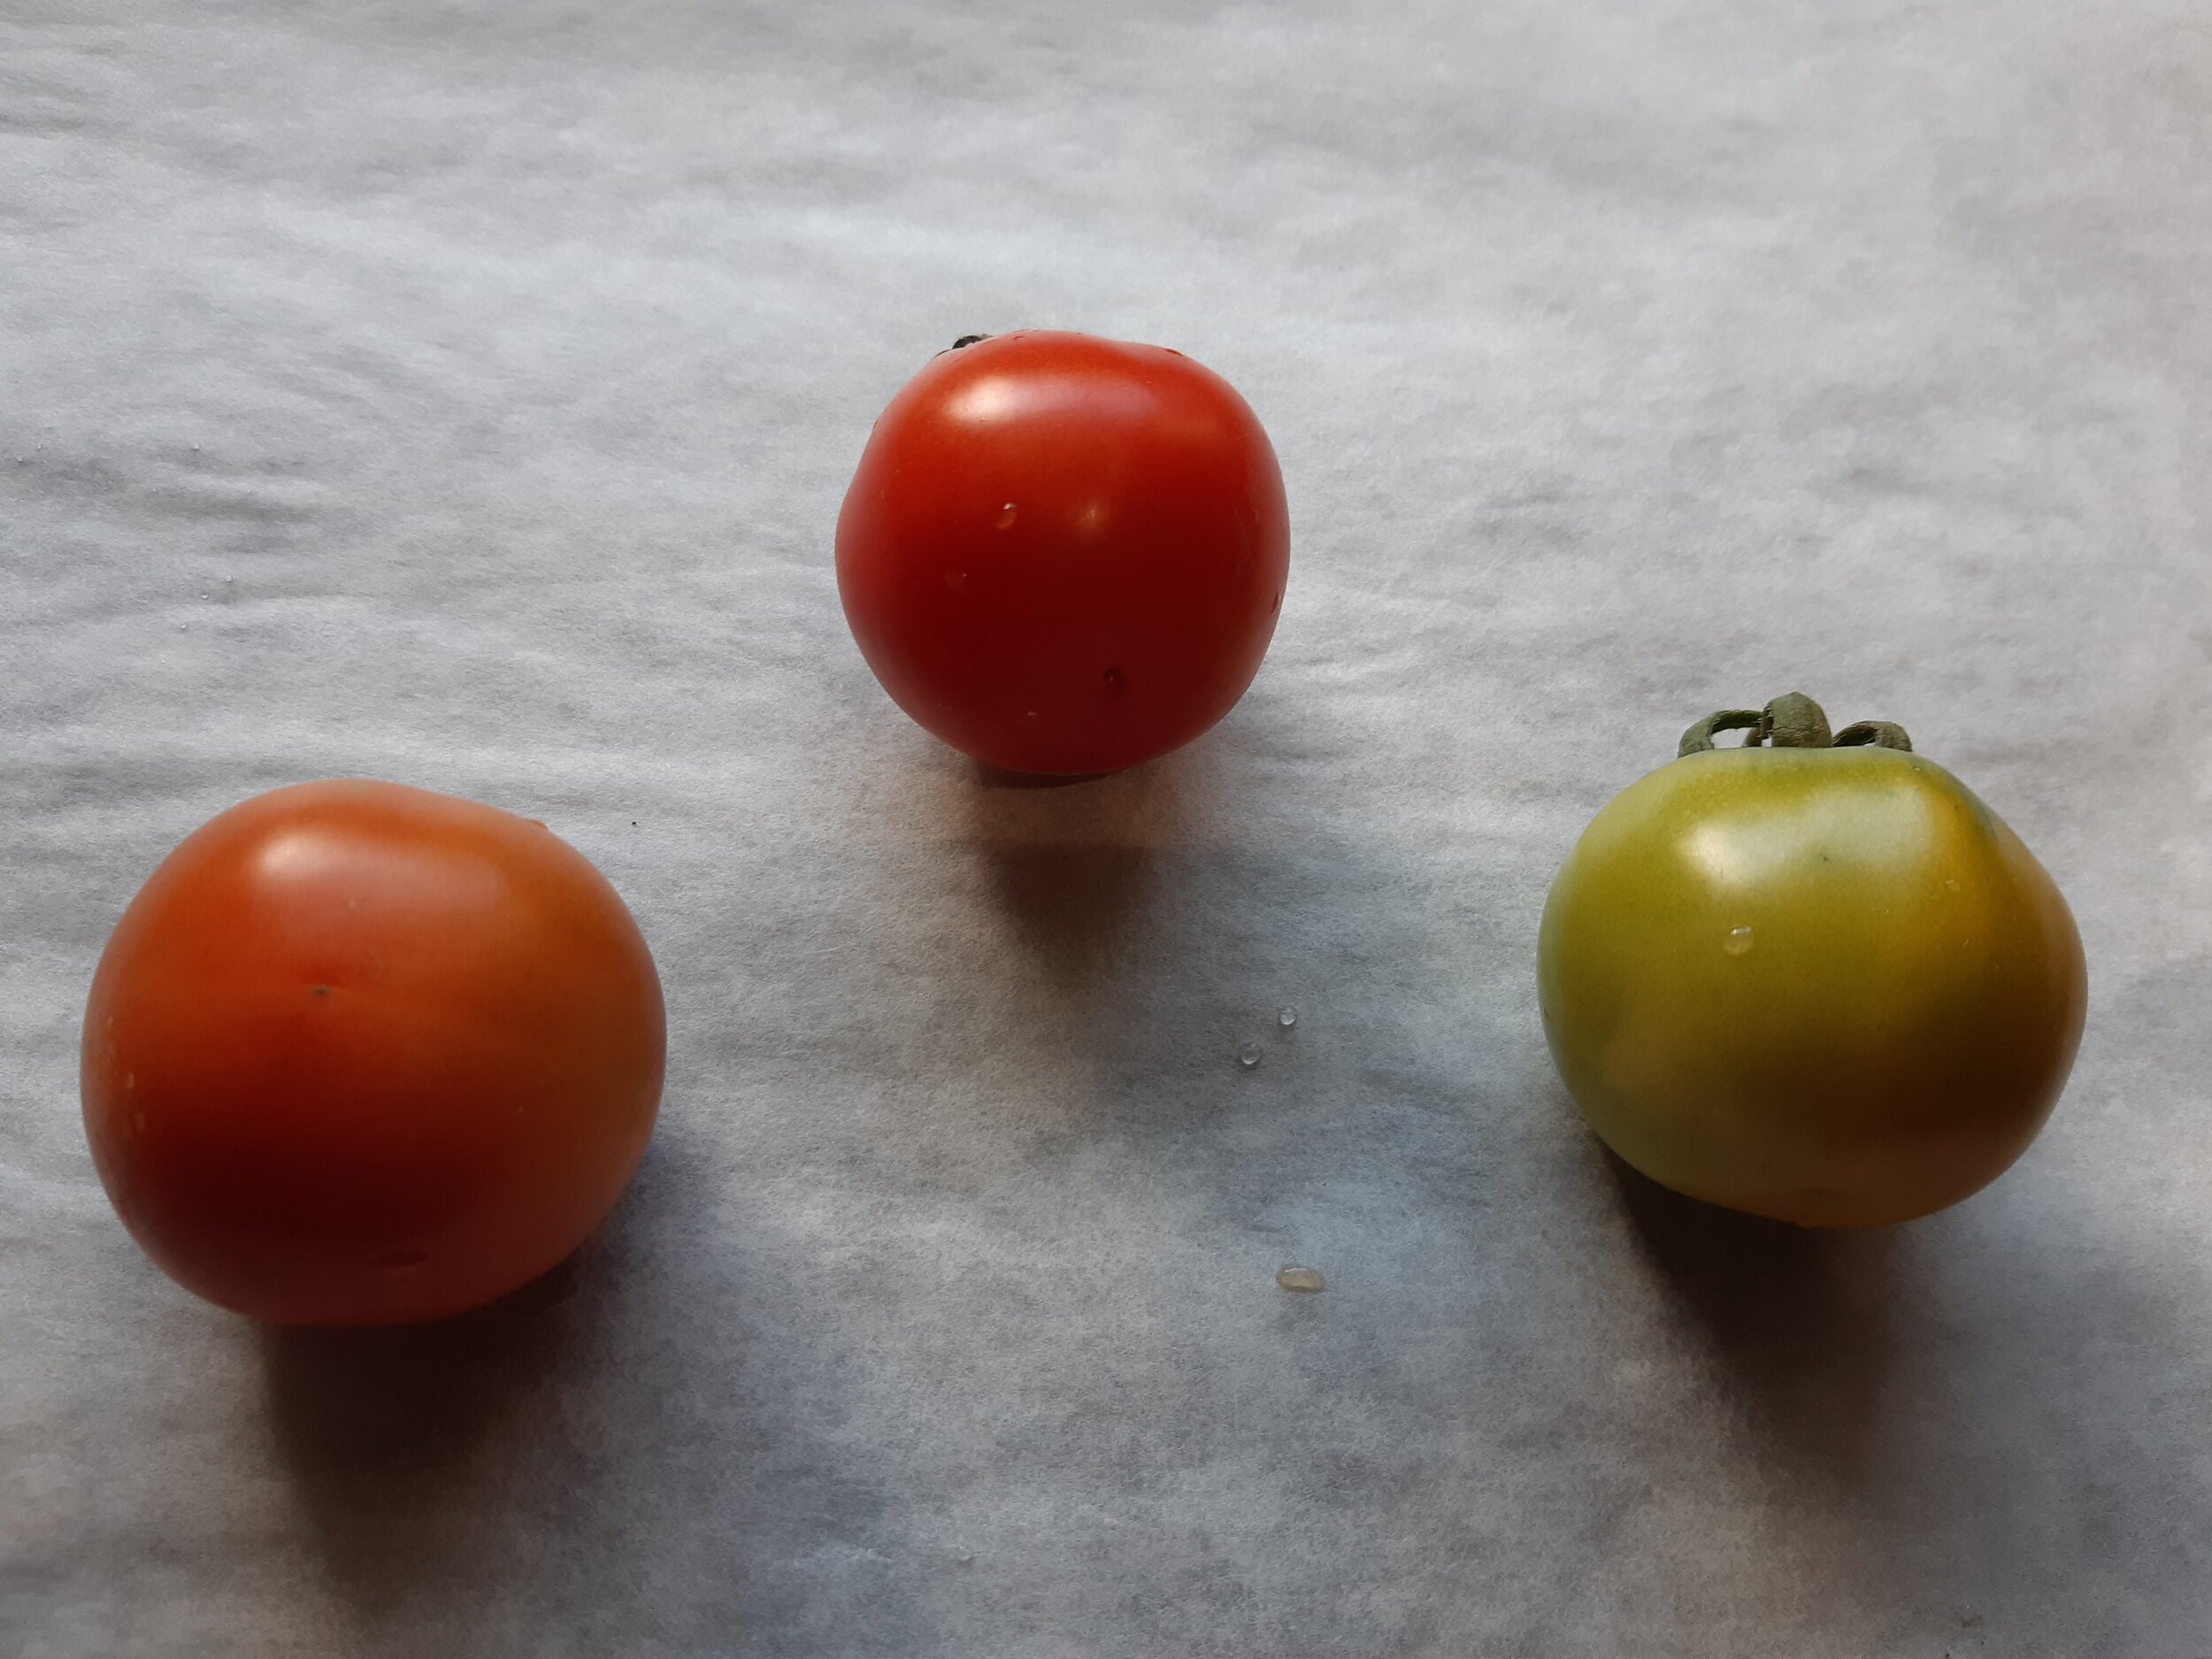  Tomatoes at various stages of maturity to ripeness. 